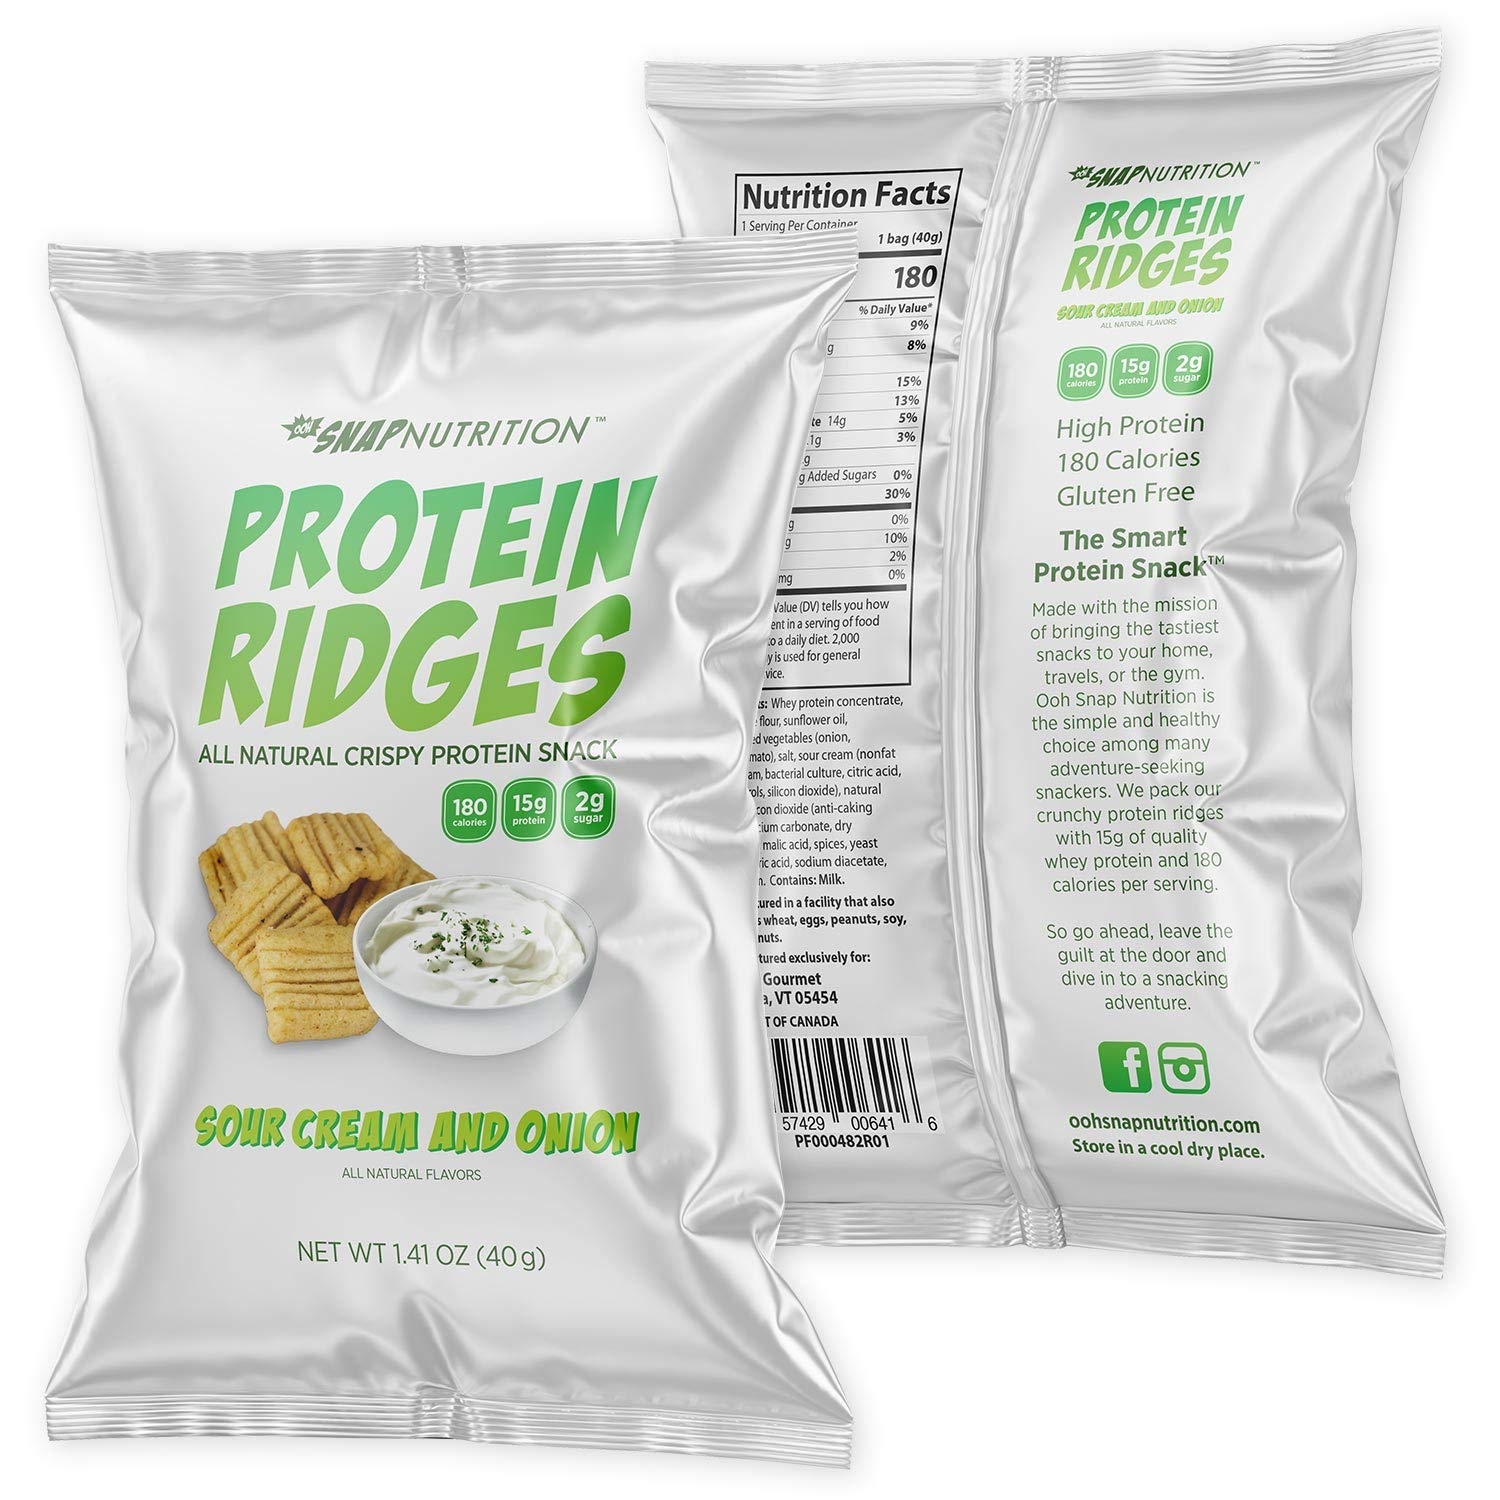 Ooh Snap Nutrition Protein Ridges - Gluten Free and All Natural Whey Protein Chips - Low Calories and Low Sugar Snack - Sour Cream and Onion, 15 Count